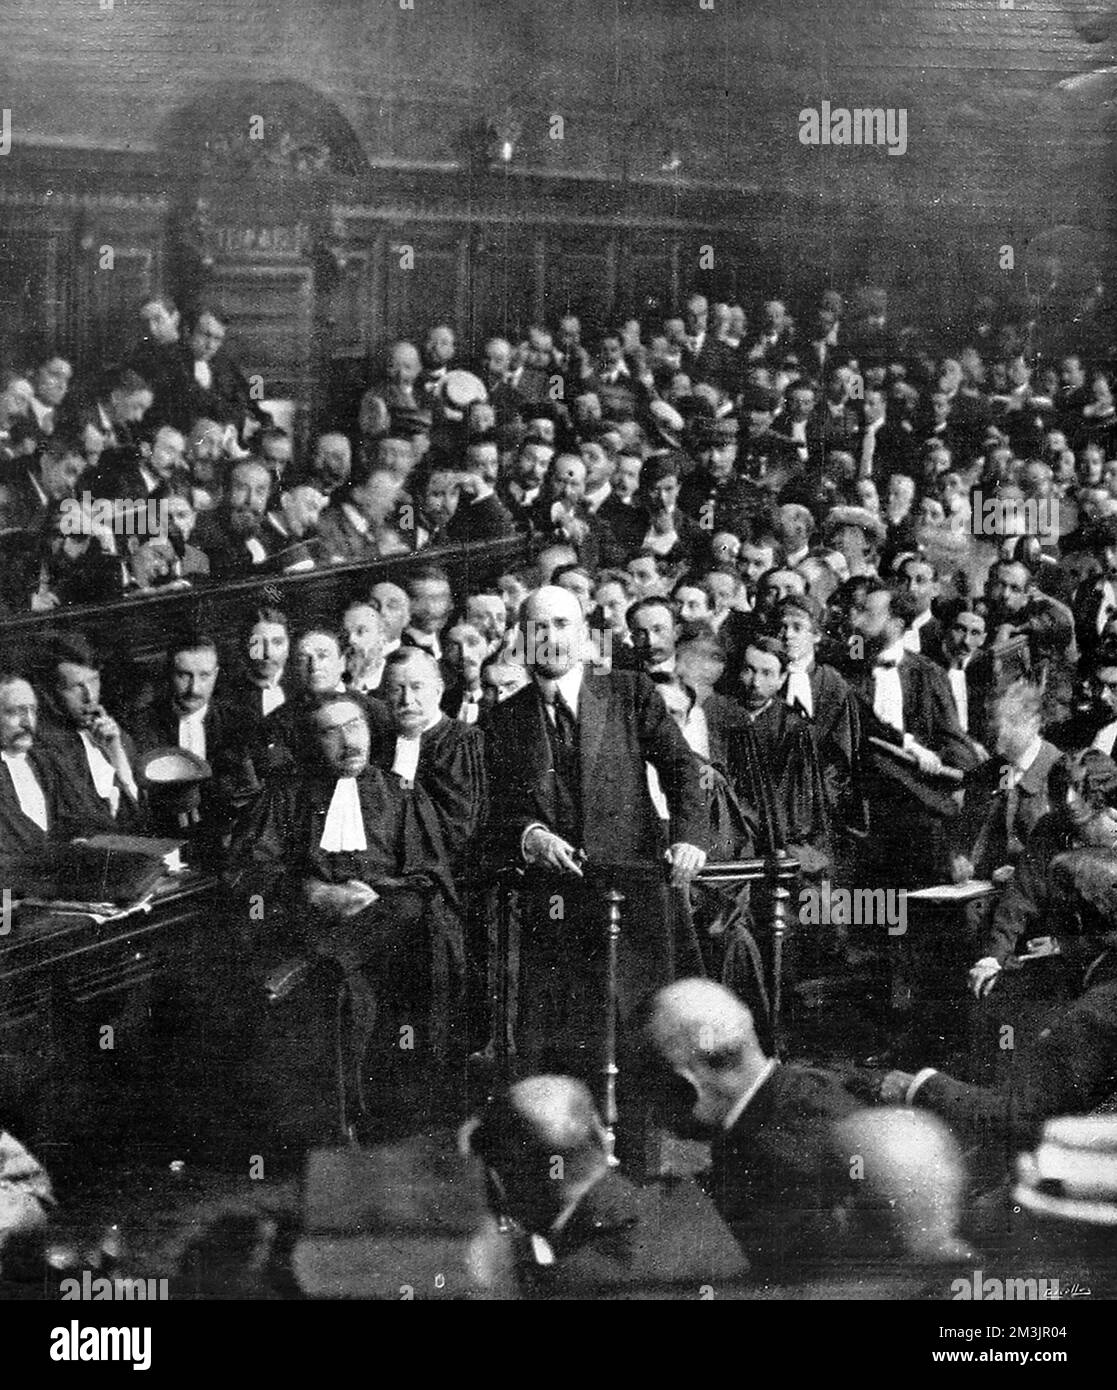 Joseph Caillaux giving evidence at the trial of his wife. Caillaux was French Prime Minister from June 1911 to January 1912. In 1913 he was accused of being a pacifist when he opposed an extension to conscription. A press campaign against Caillaux followed with the editor of 'Le Figaro', Gaston Calmette threatening to publish love letters between Caillaux and his former mistress, now his second wife. This resulted in Madame Caillaux killing Calmette but at her trail she was acquitted of murder.     Date: 1914 Stock Photo